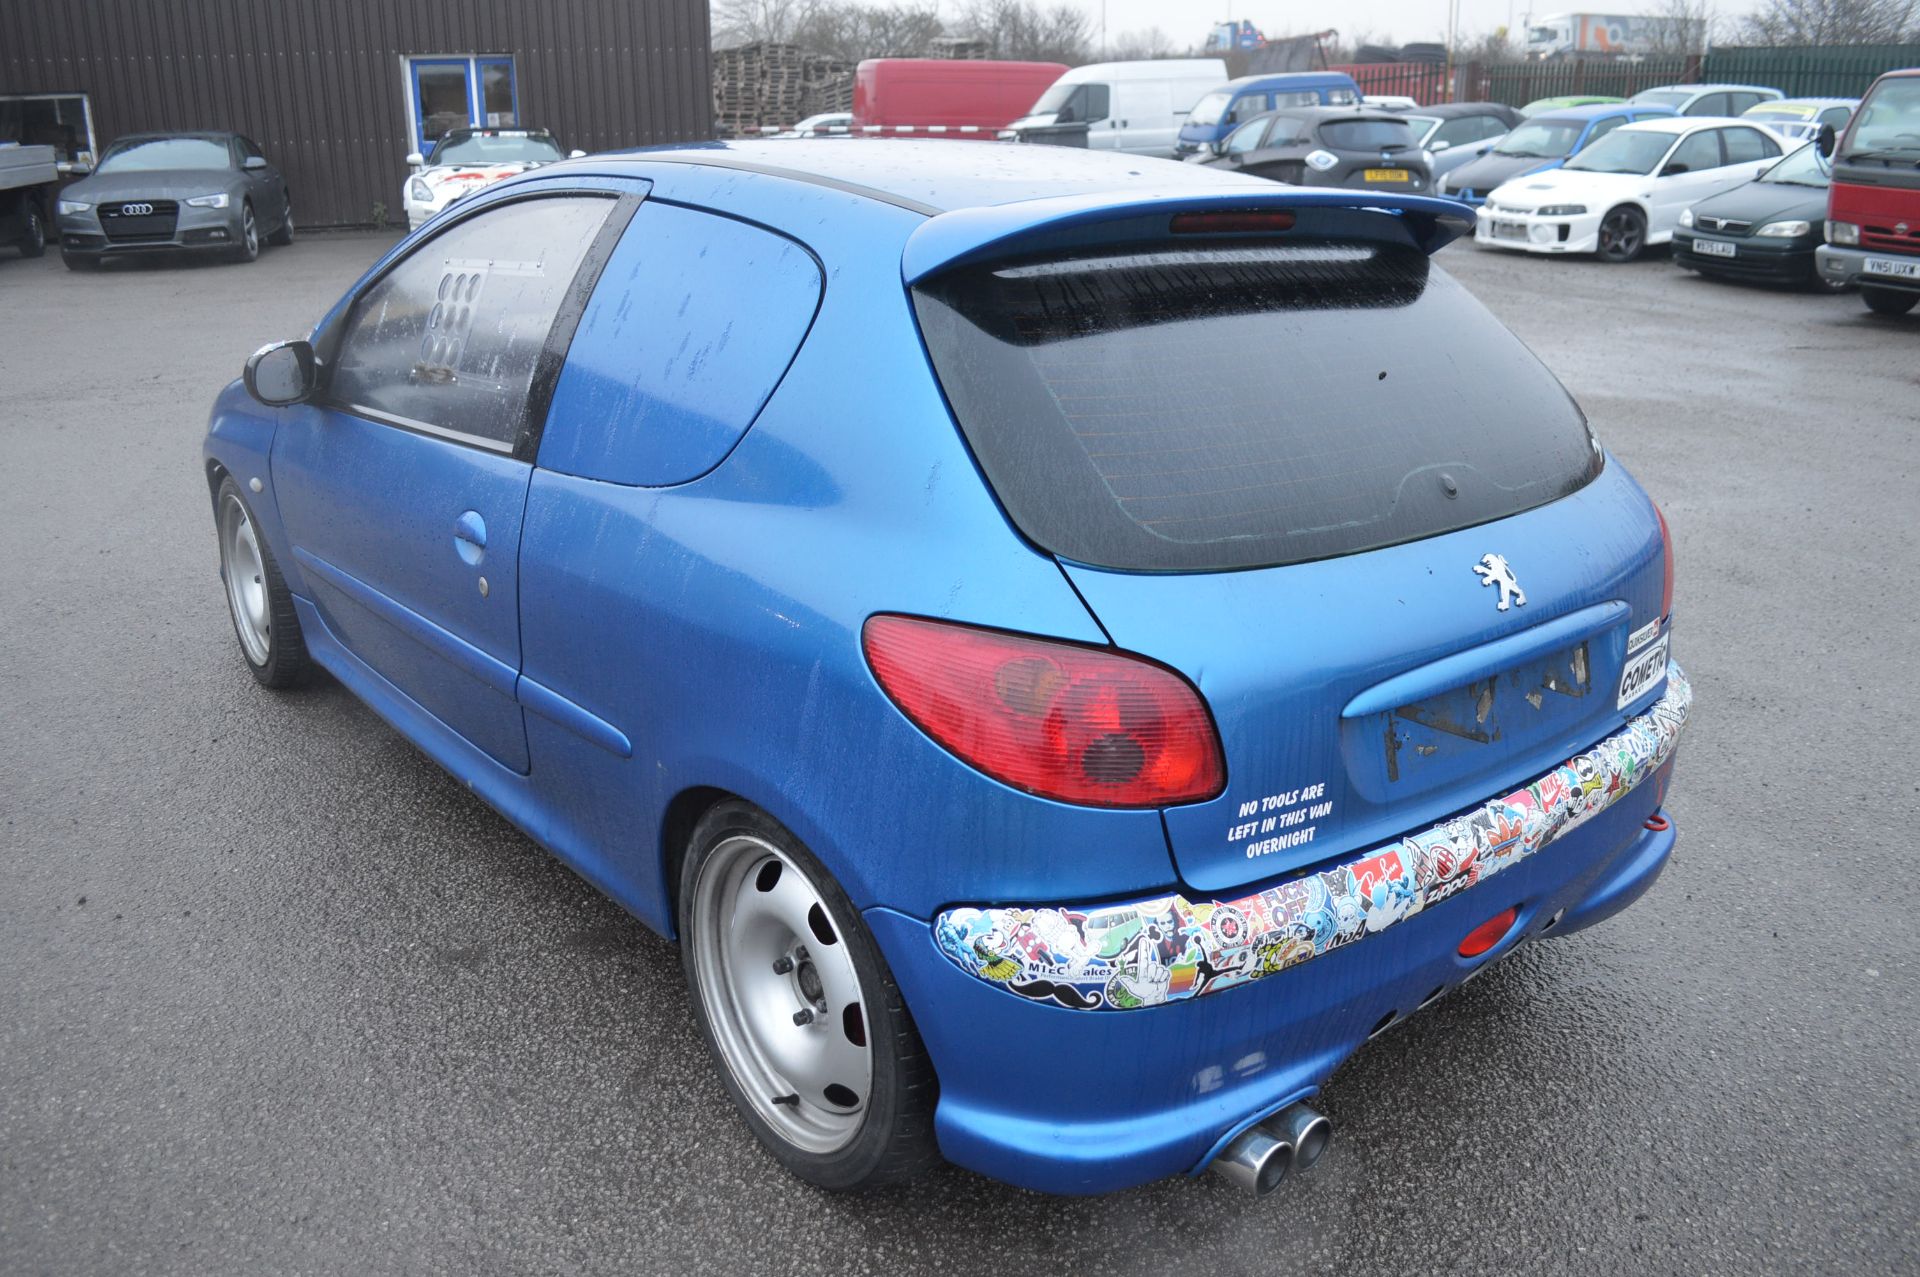 2003/03 REG PEUGEOT 206 GTI 180HP FAST TRACK DAY CAR  HAS THE 'VAN' PANELS FITTED INSTEAD OF REAR - Image 4 of 15